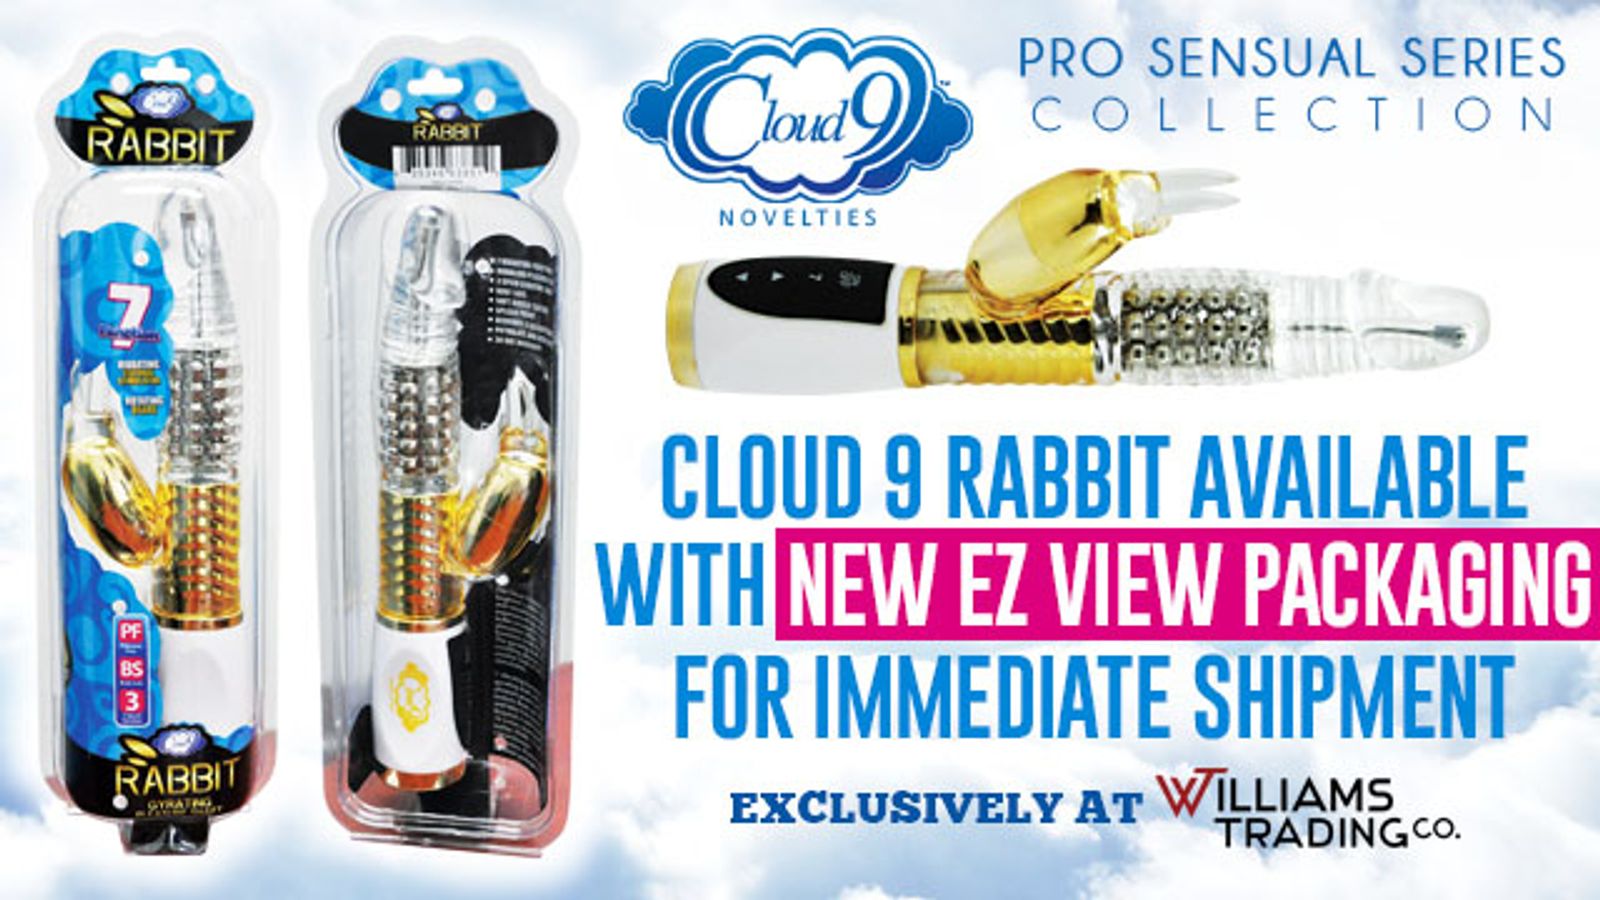 Williams Trading Offers Cloud 9 Rabbit With New EZ View Packaging